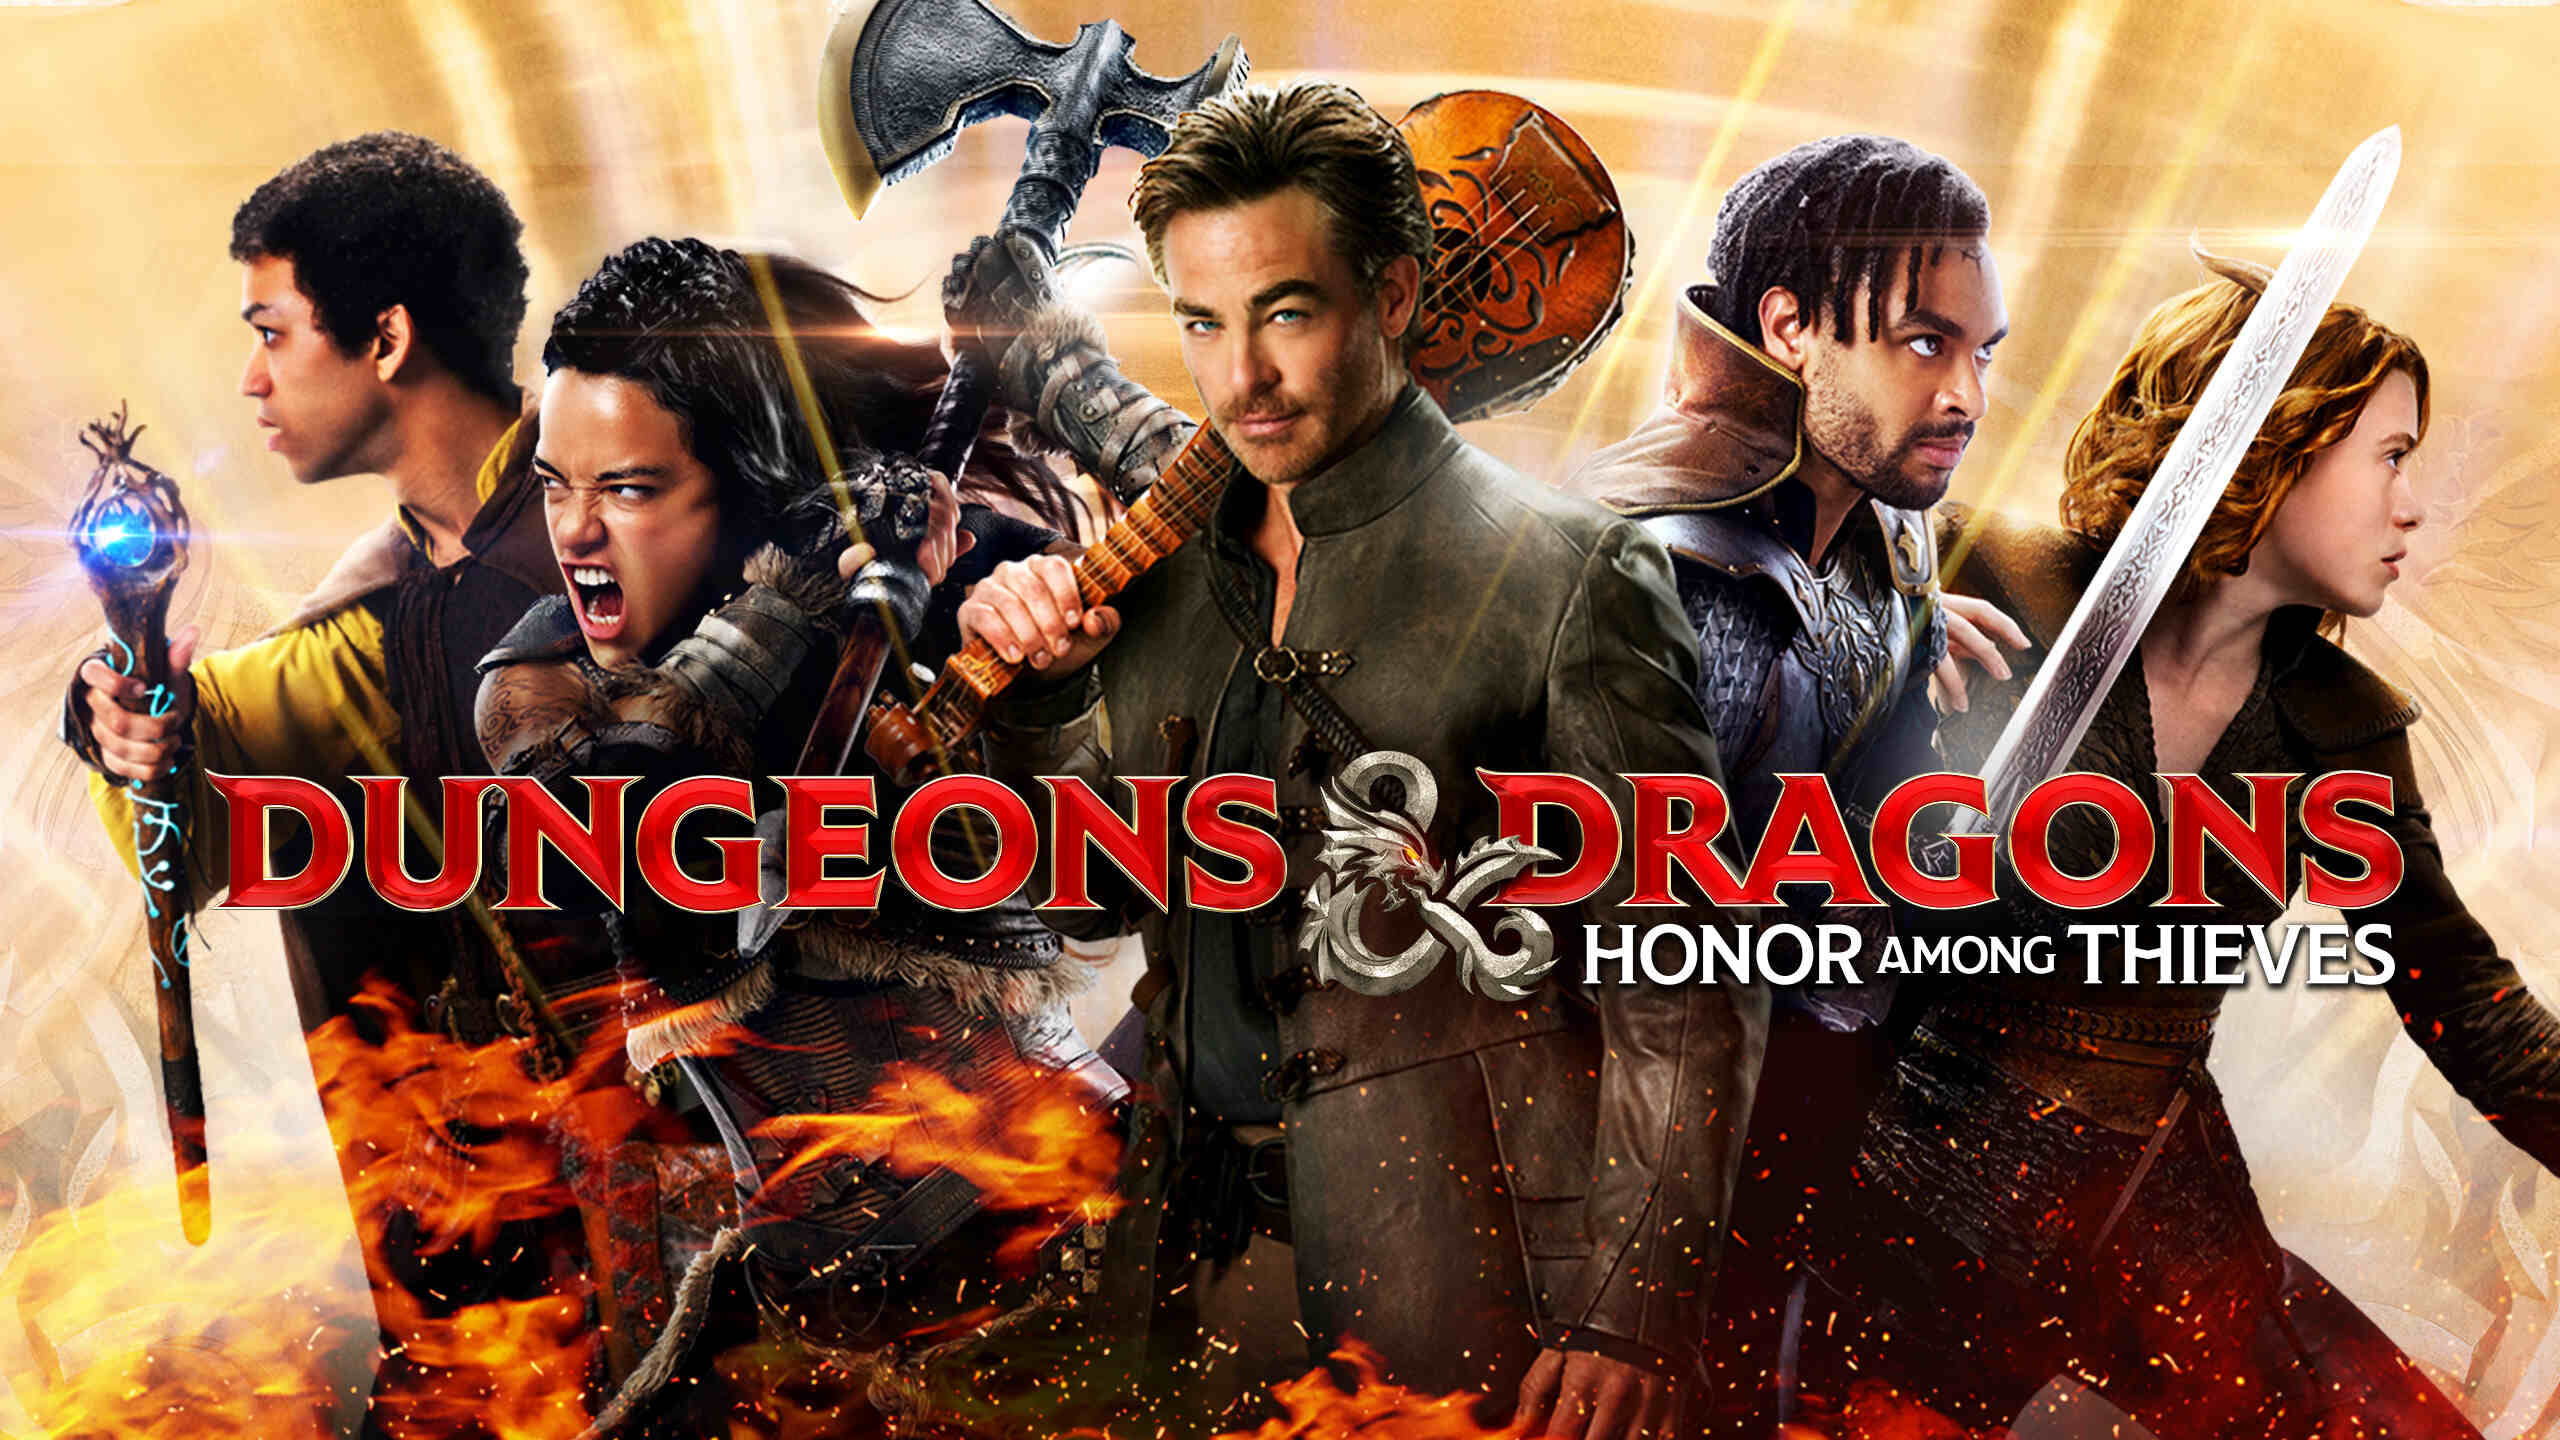 39-facts-about-the-movie-dungeons-dragons-honor-among-thieves